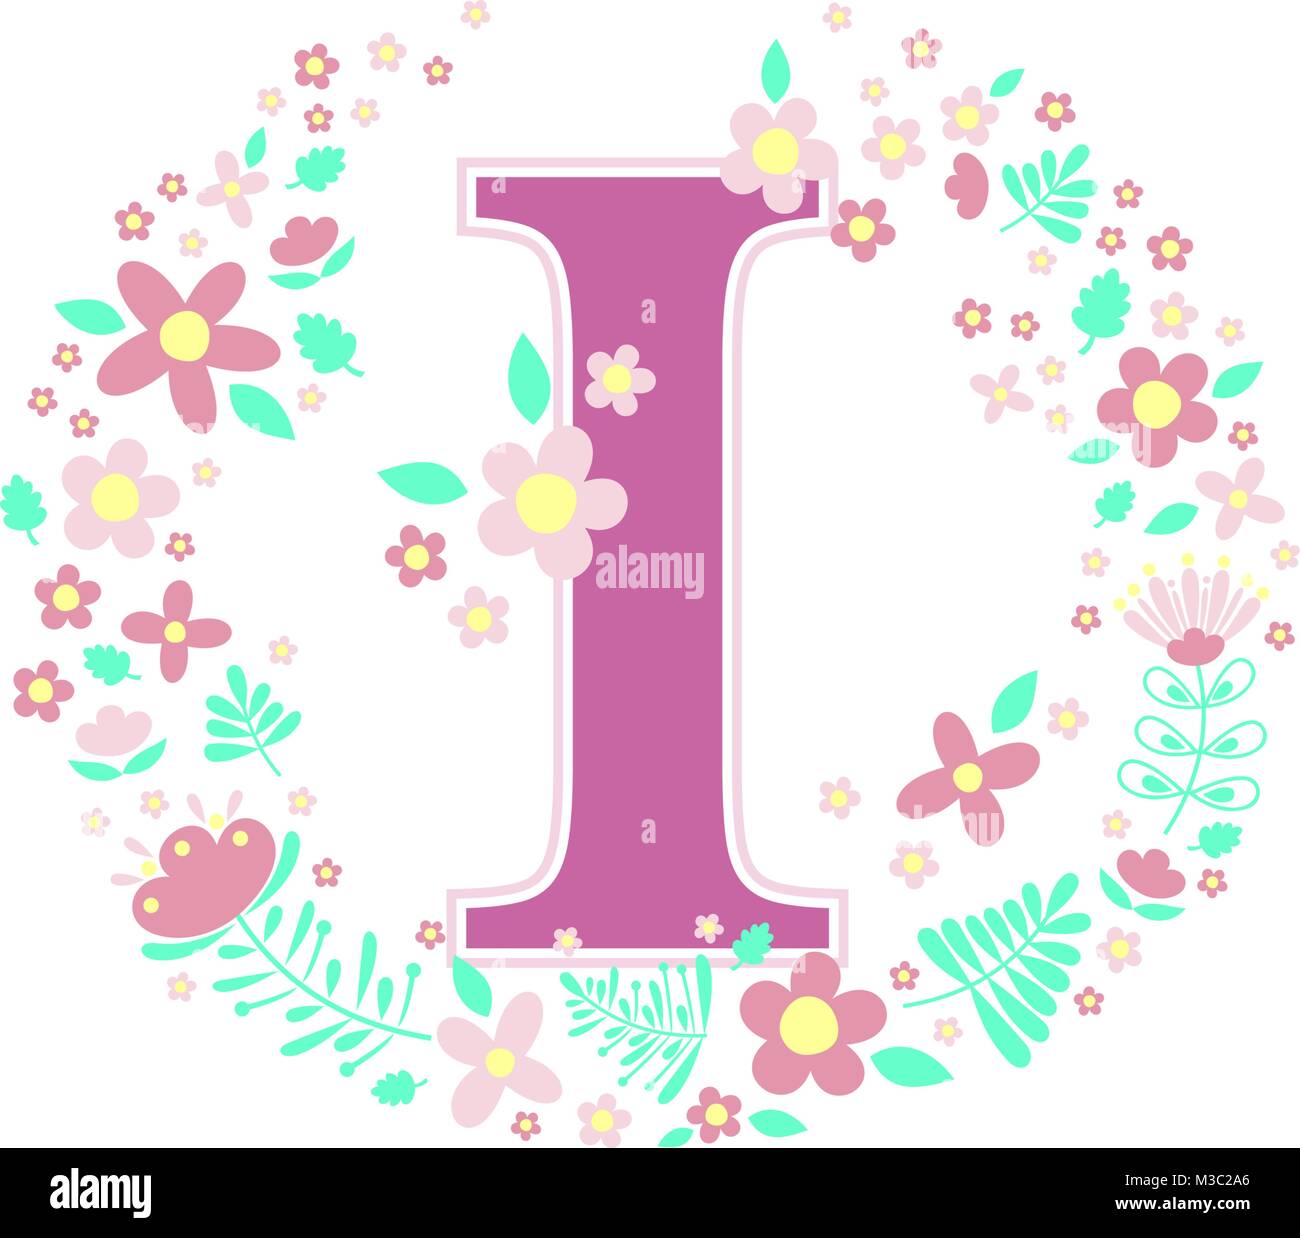 initial letter i with decorative flowers and design elements isolated on white background. can be used for baby name, nursery decoration, spring theme Stock Vector